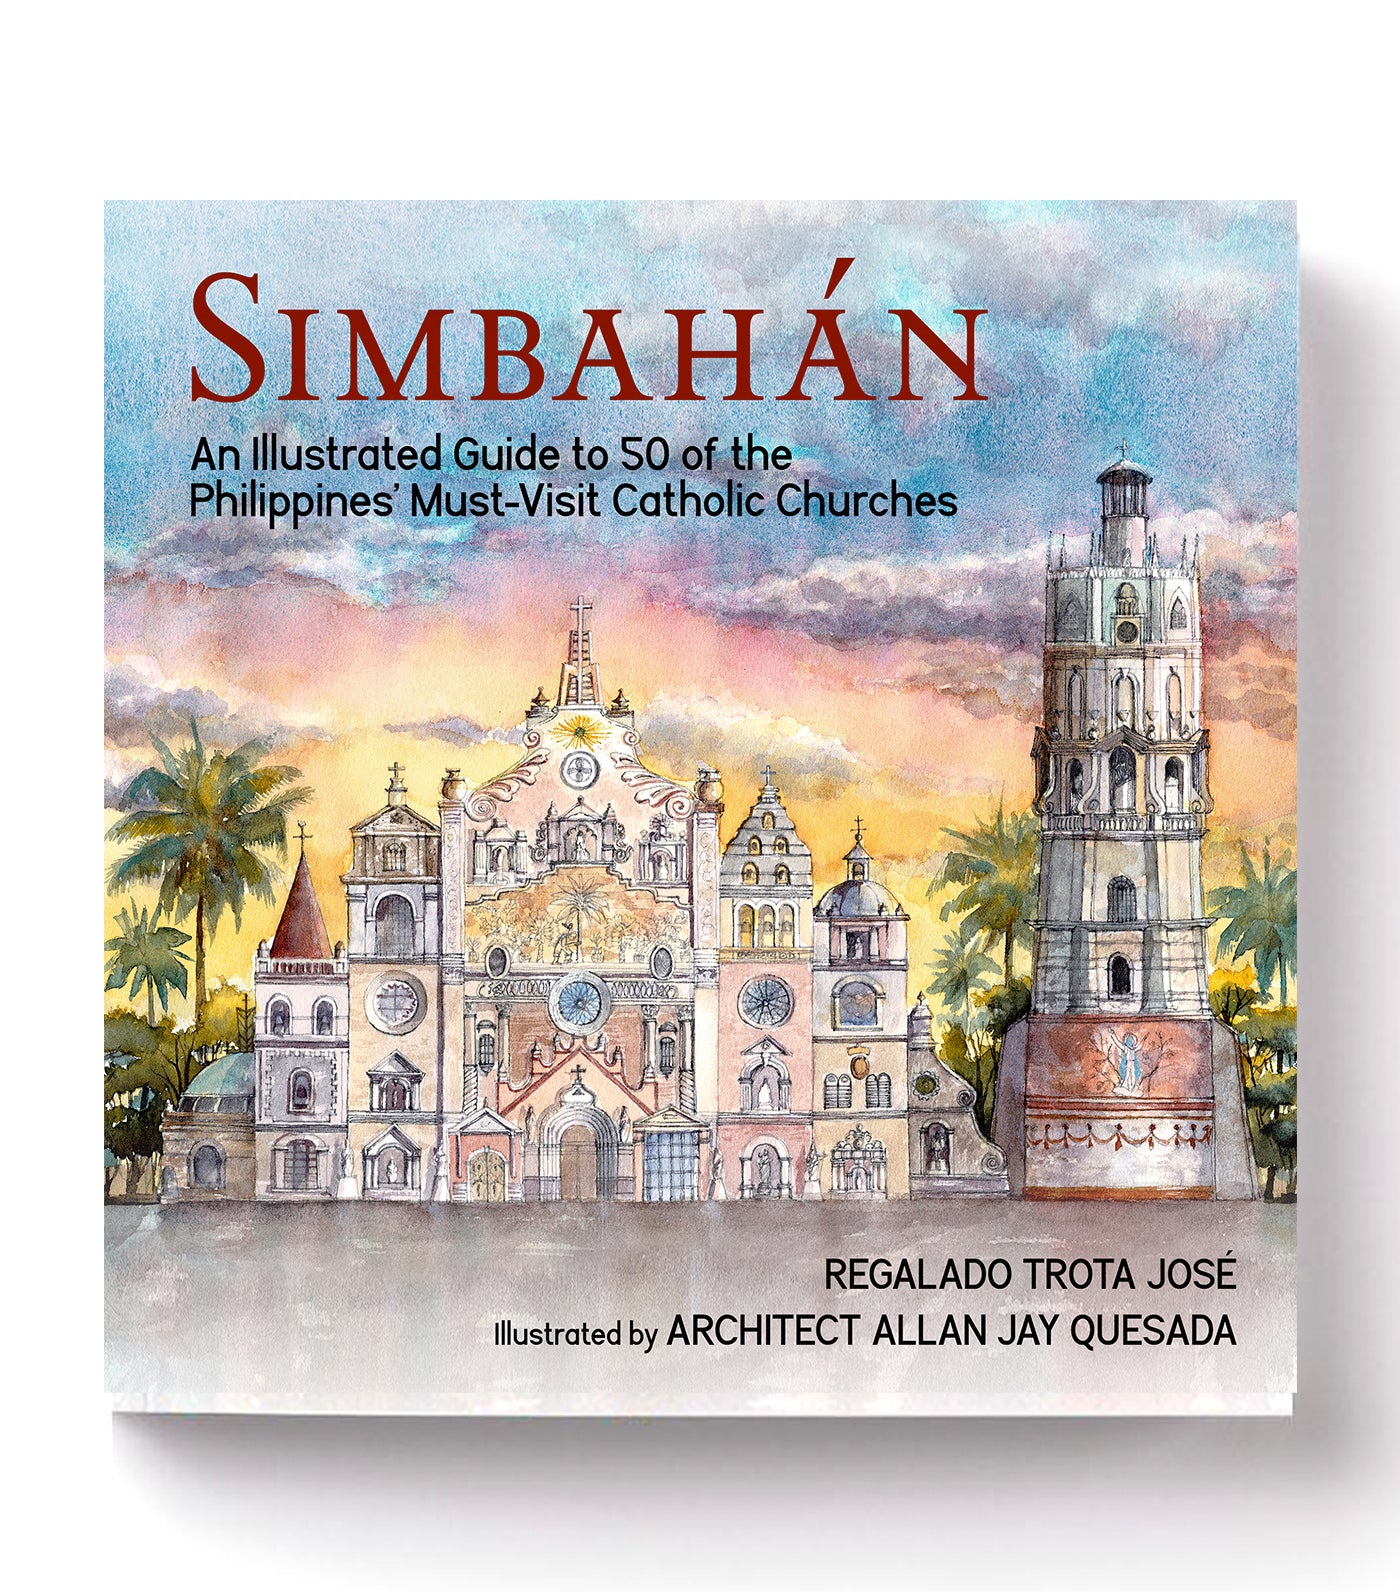 Simbahán: An Illustrated Guide to 50 of the Philippines' Must-Visit Catholic Churches by Regalado Trota José